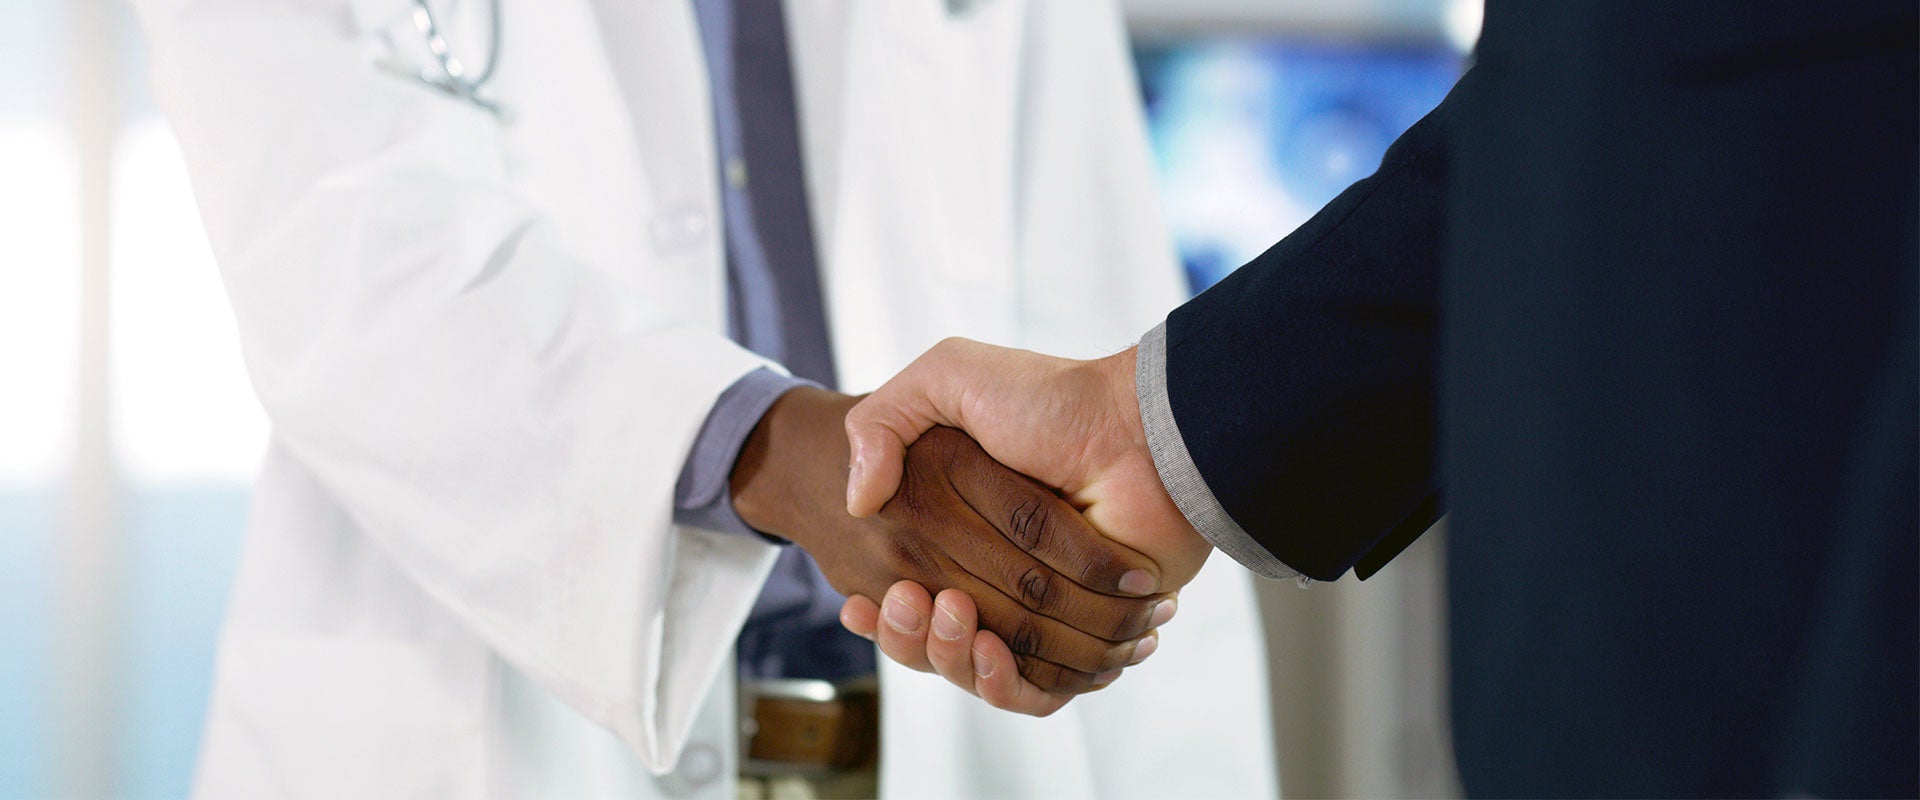 doctor and person in suit shaking hands